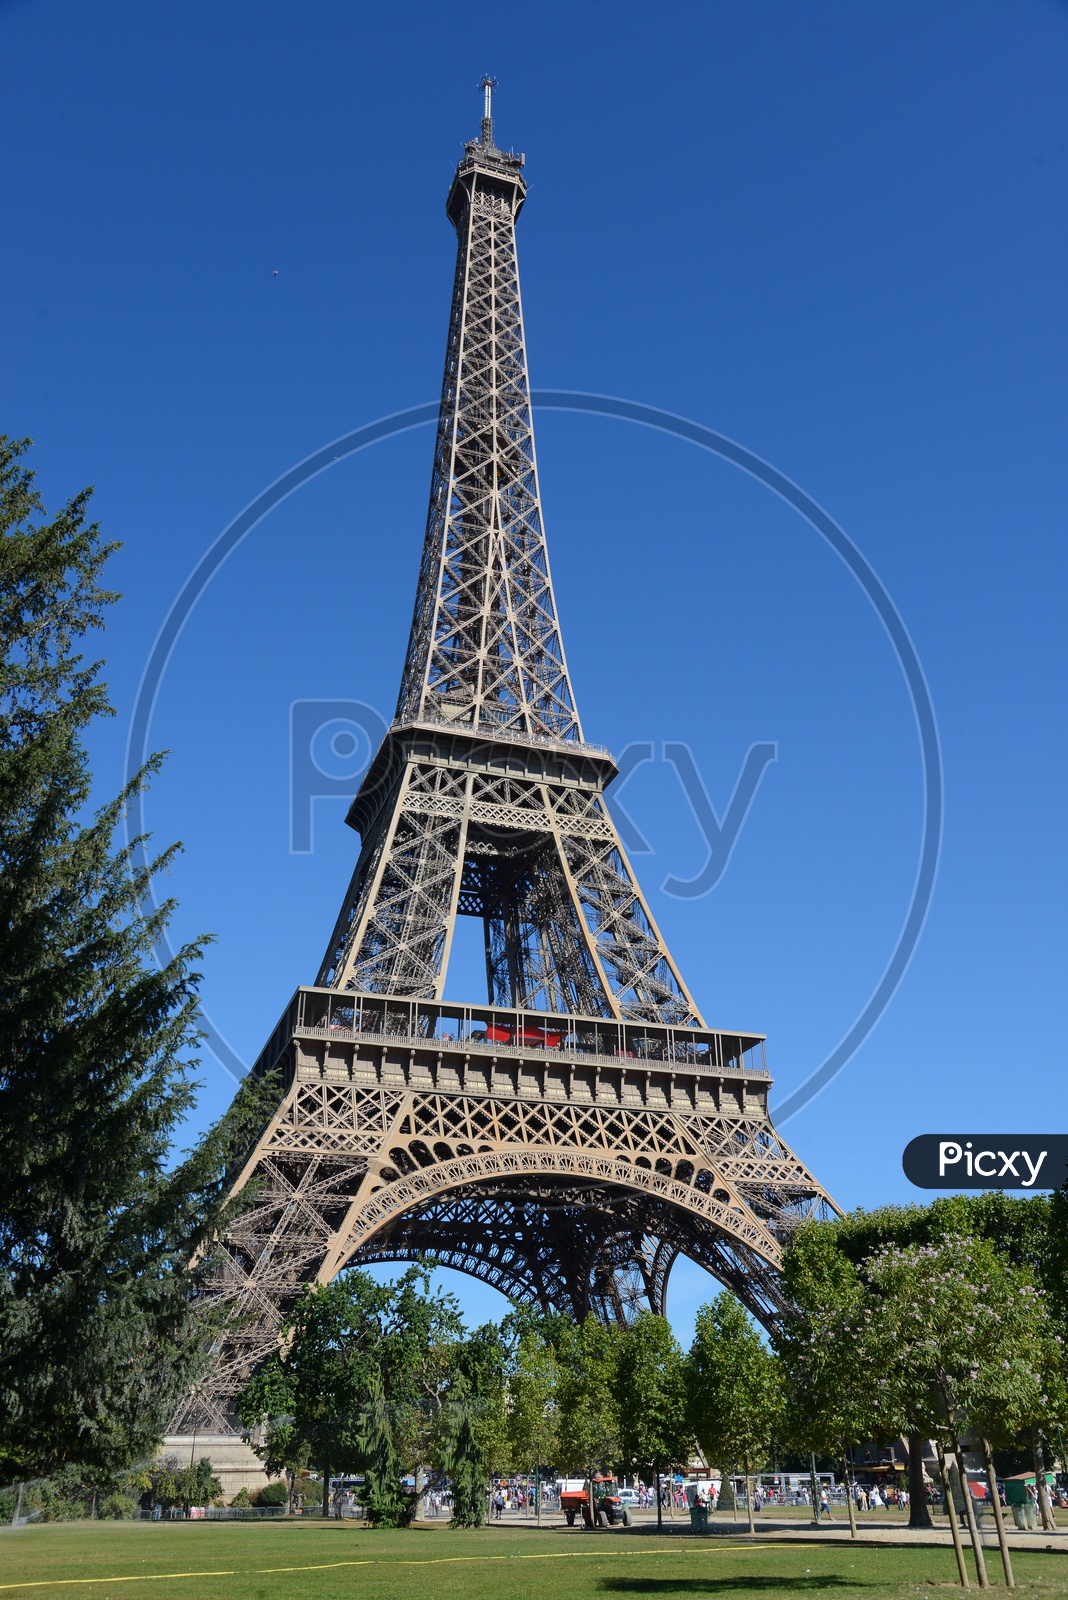 Eiffel Tower View With Lawn Garden in Fore Ground